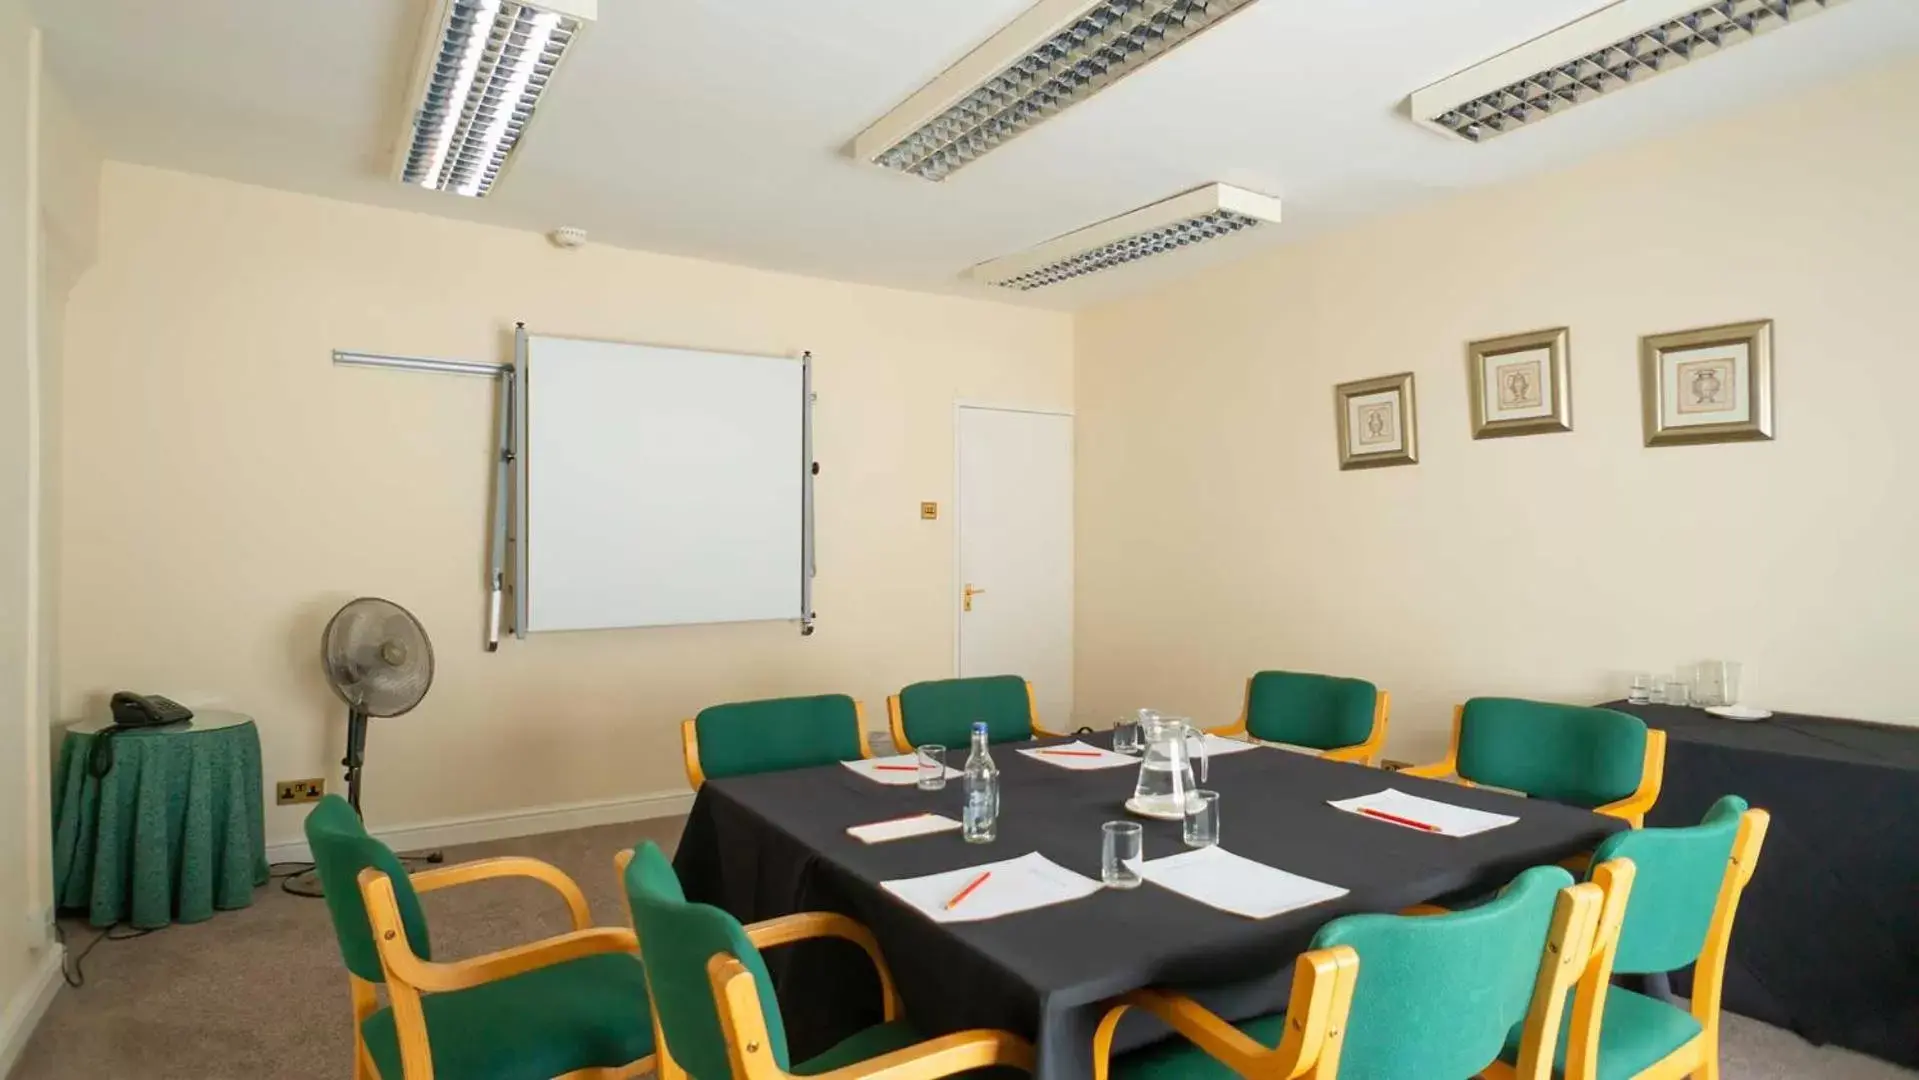 Meeting/conference room in Holt Lodge Hotel